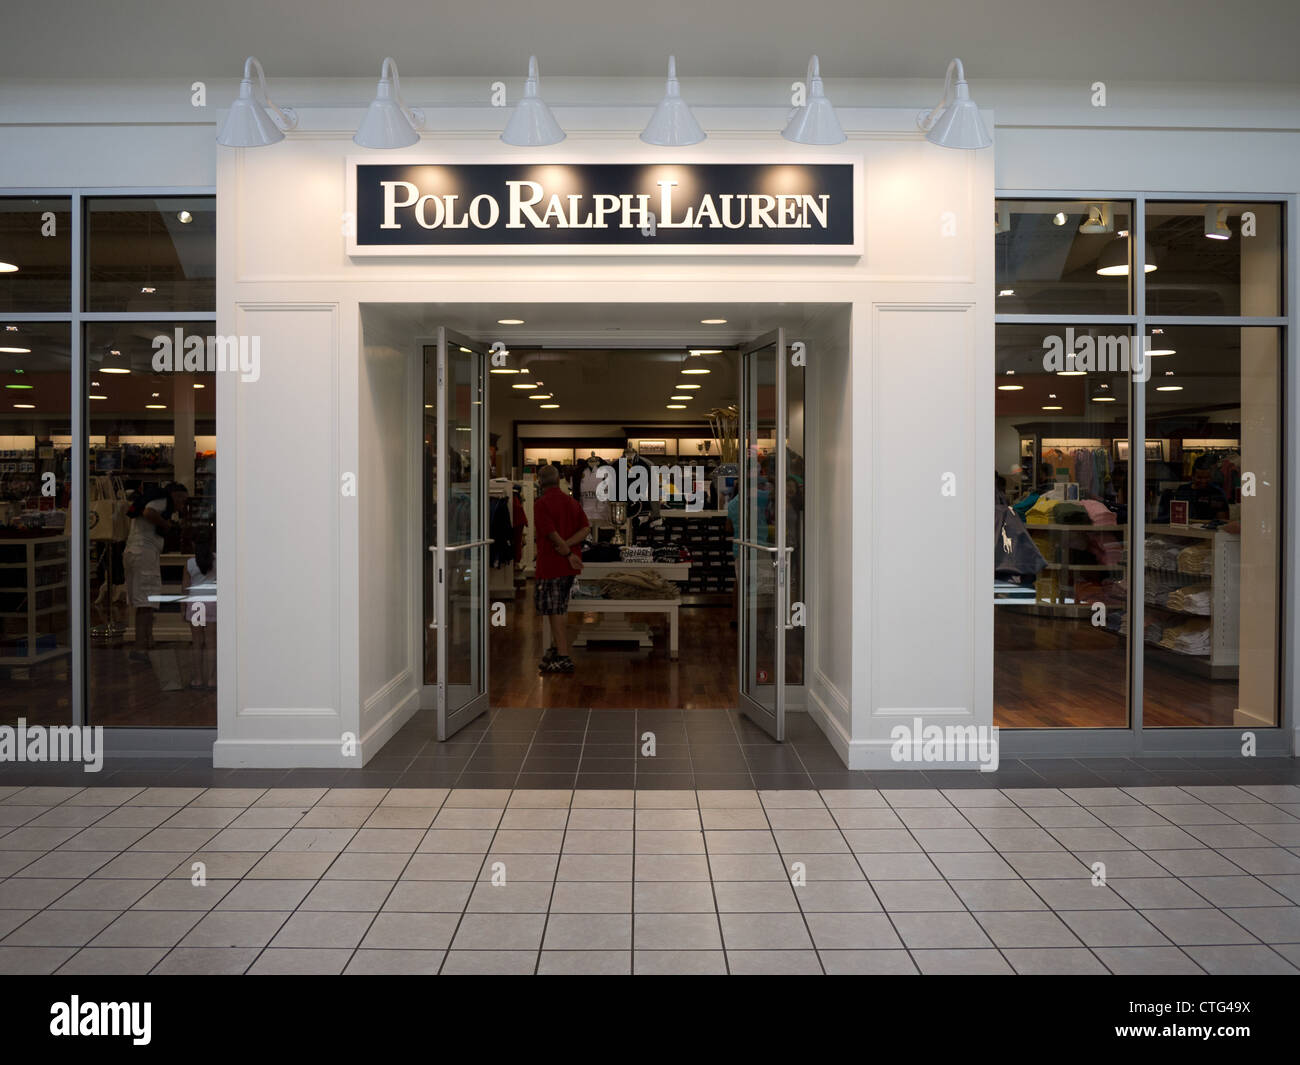 Polo Ralph Lauren Magasin Flash Sales, 51% OFF | kineto.fit